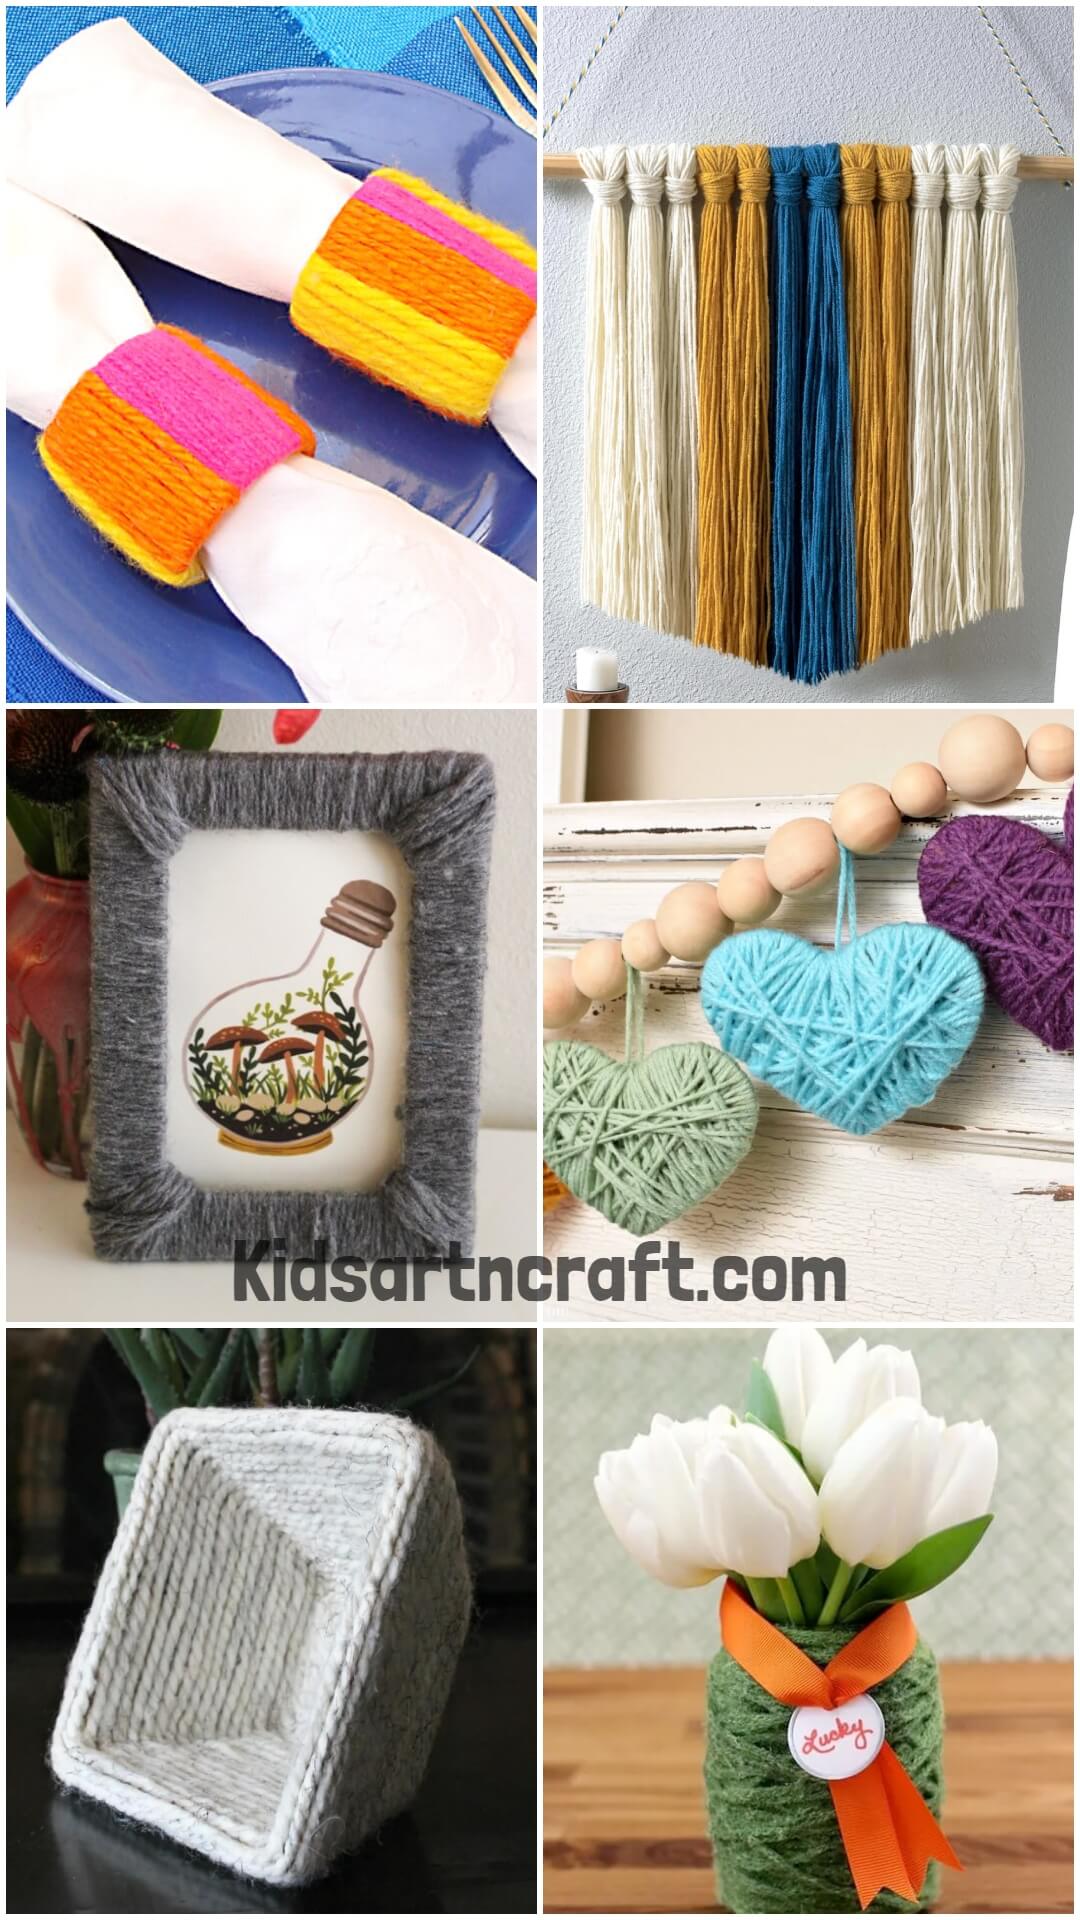  Crafts to make with yarn without knitting